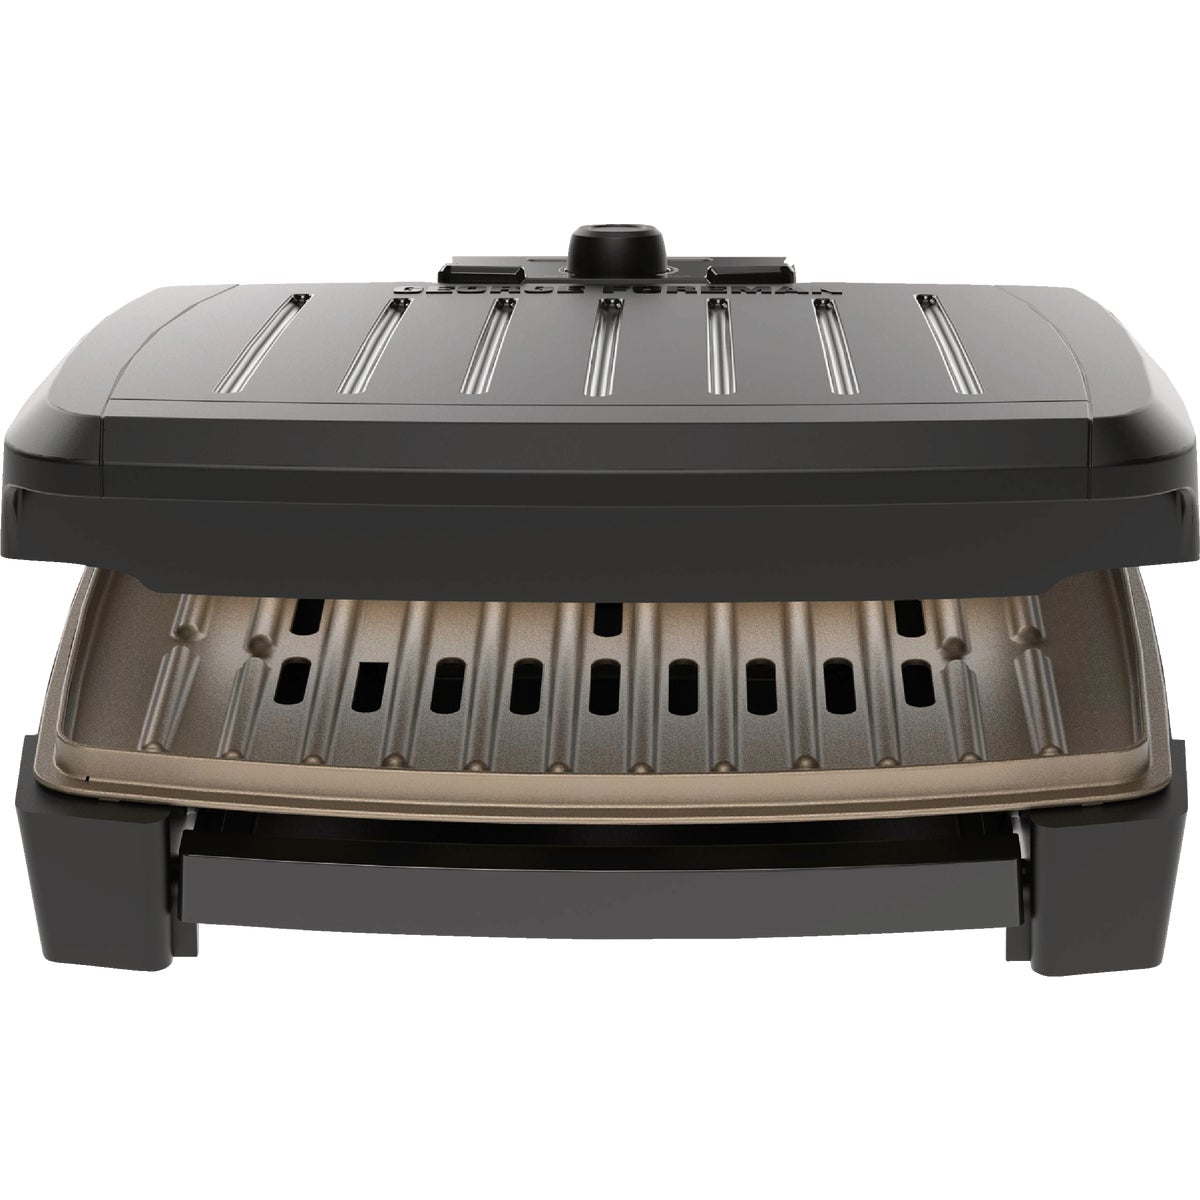 George Foreman 5-Serving Submersible Grill with Black Plates